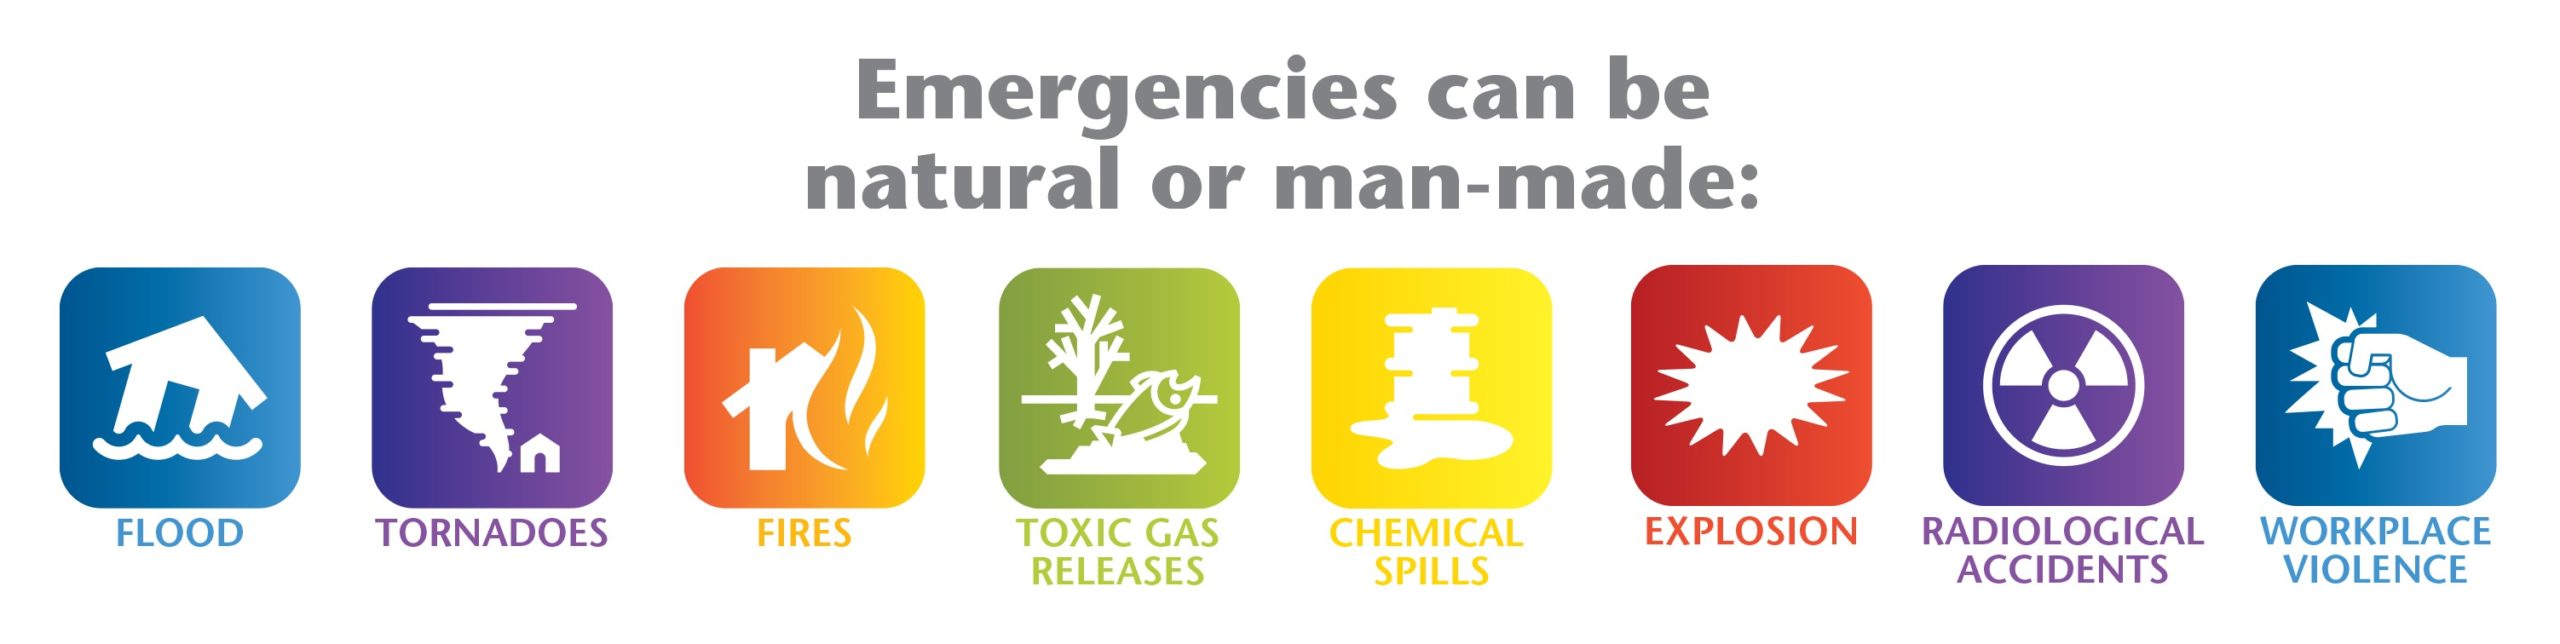 Emergencies can be natural or man-made: Flood, Tornadoes, Fires, Toxic Gas Releases, Chemical Spills, Explosion, Radiological Accidents, Workplace Violence